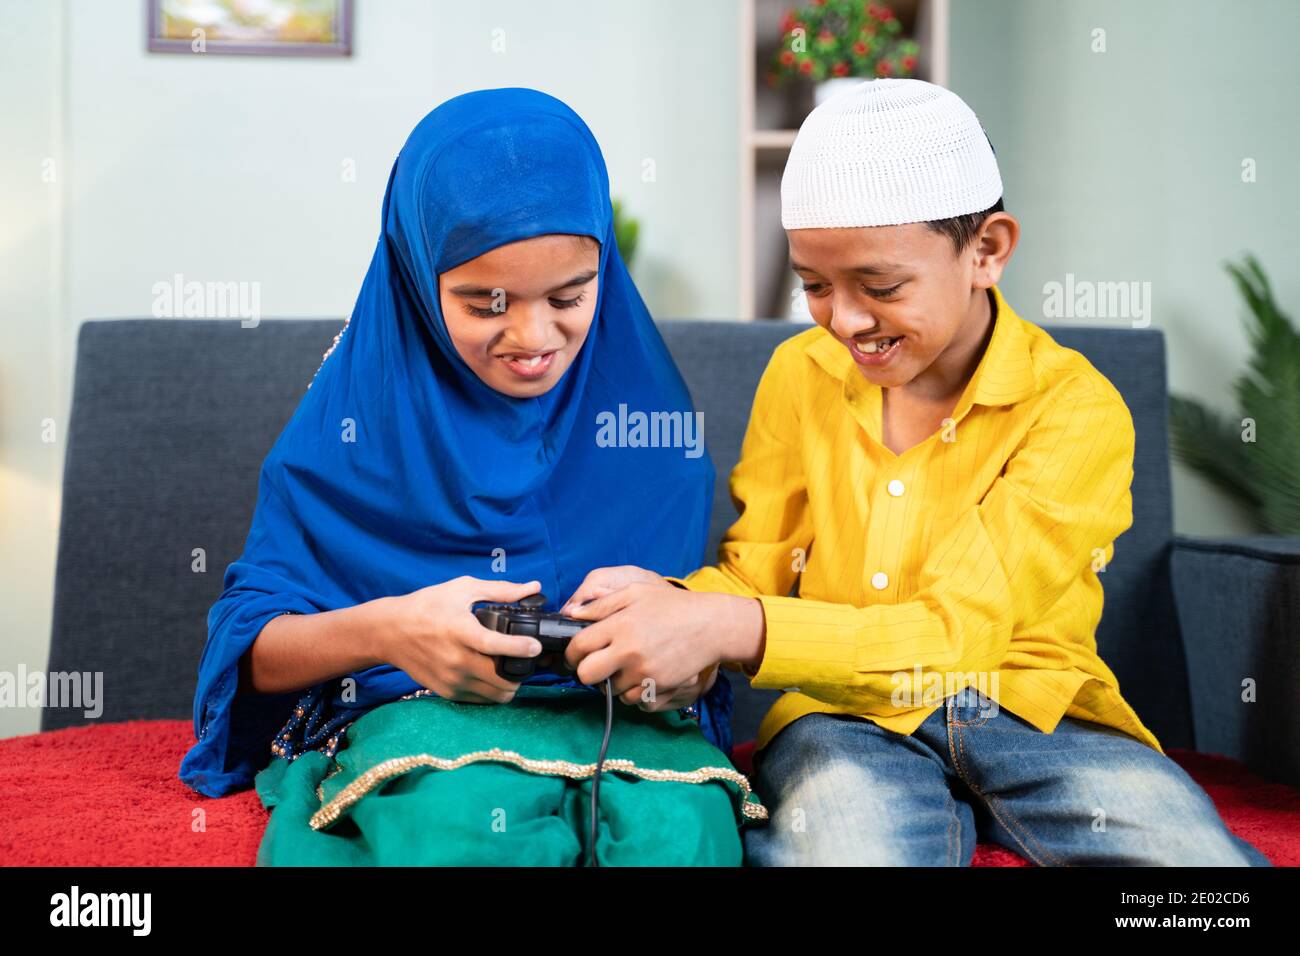 Muslim brother snatching gamepad from his sister to play video game at home - Concept of childhood sibling fighting Stock Photo